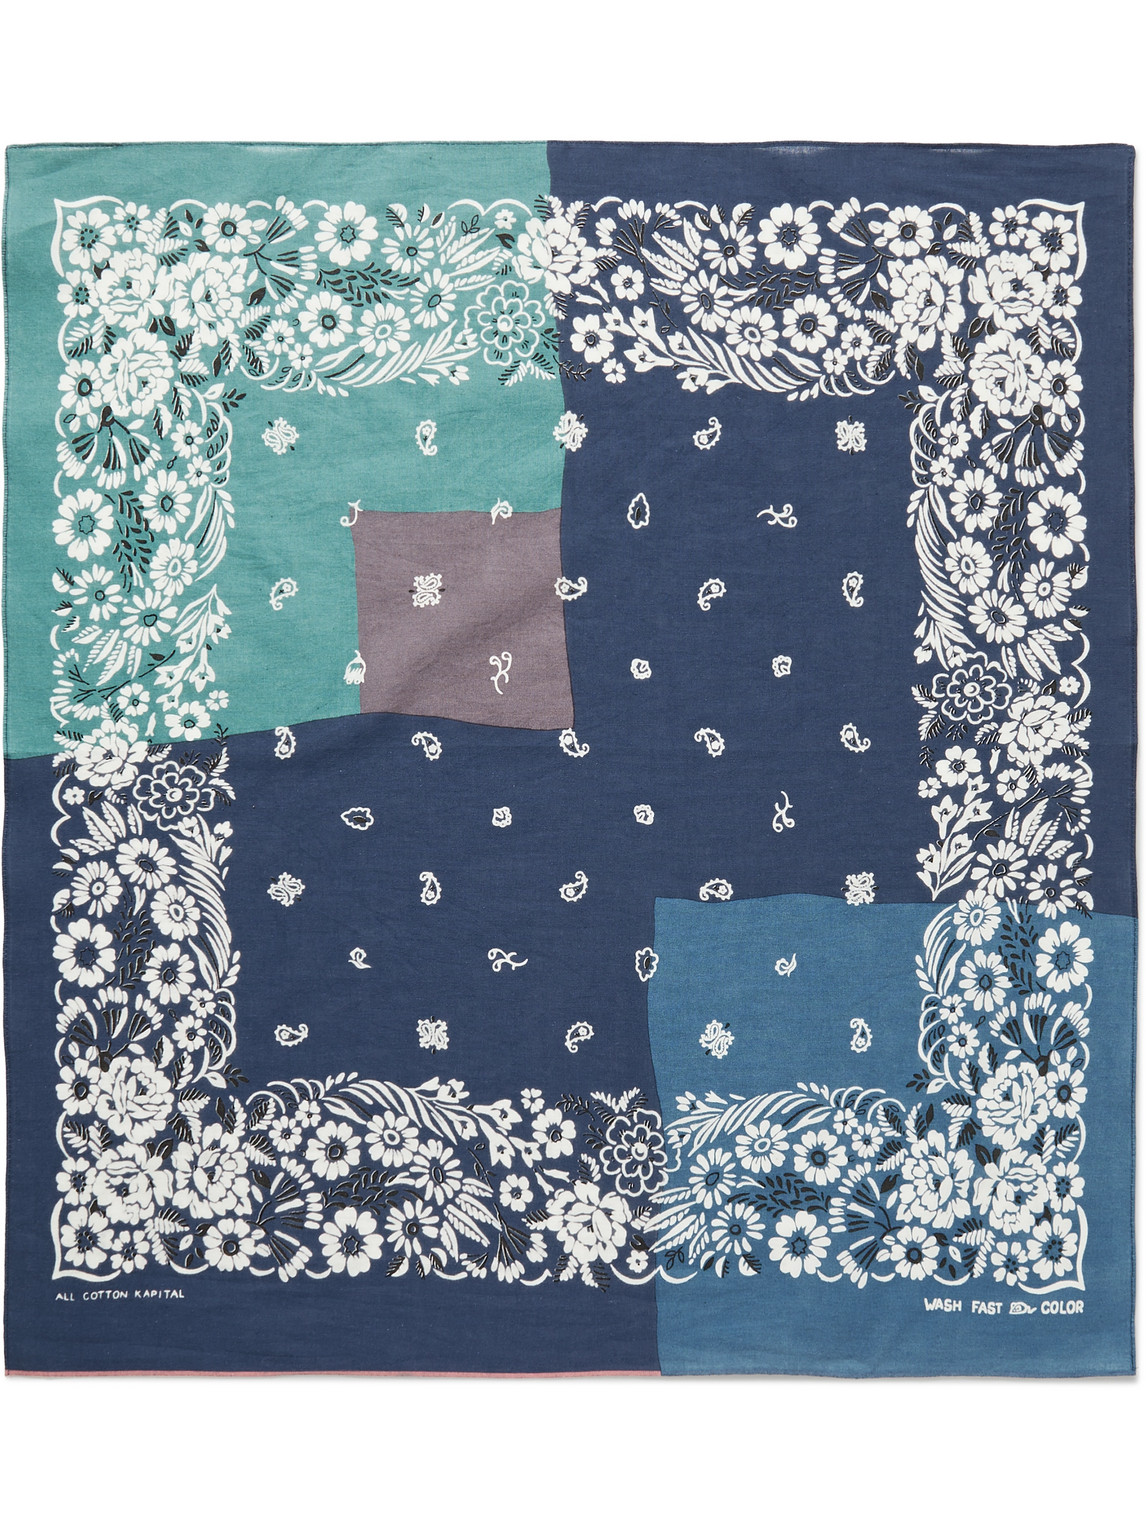 Fastcolor Patchwork Printed Selvedge Cotton-Voile Bandana